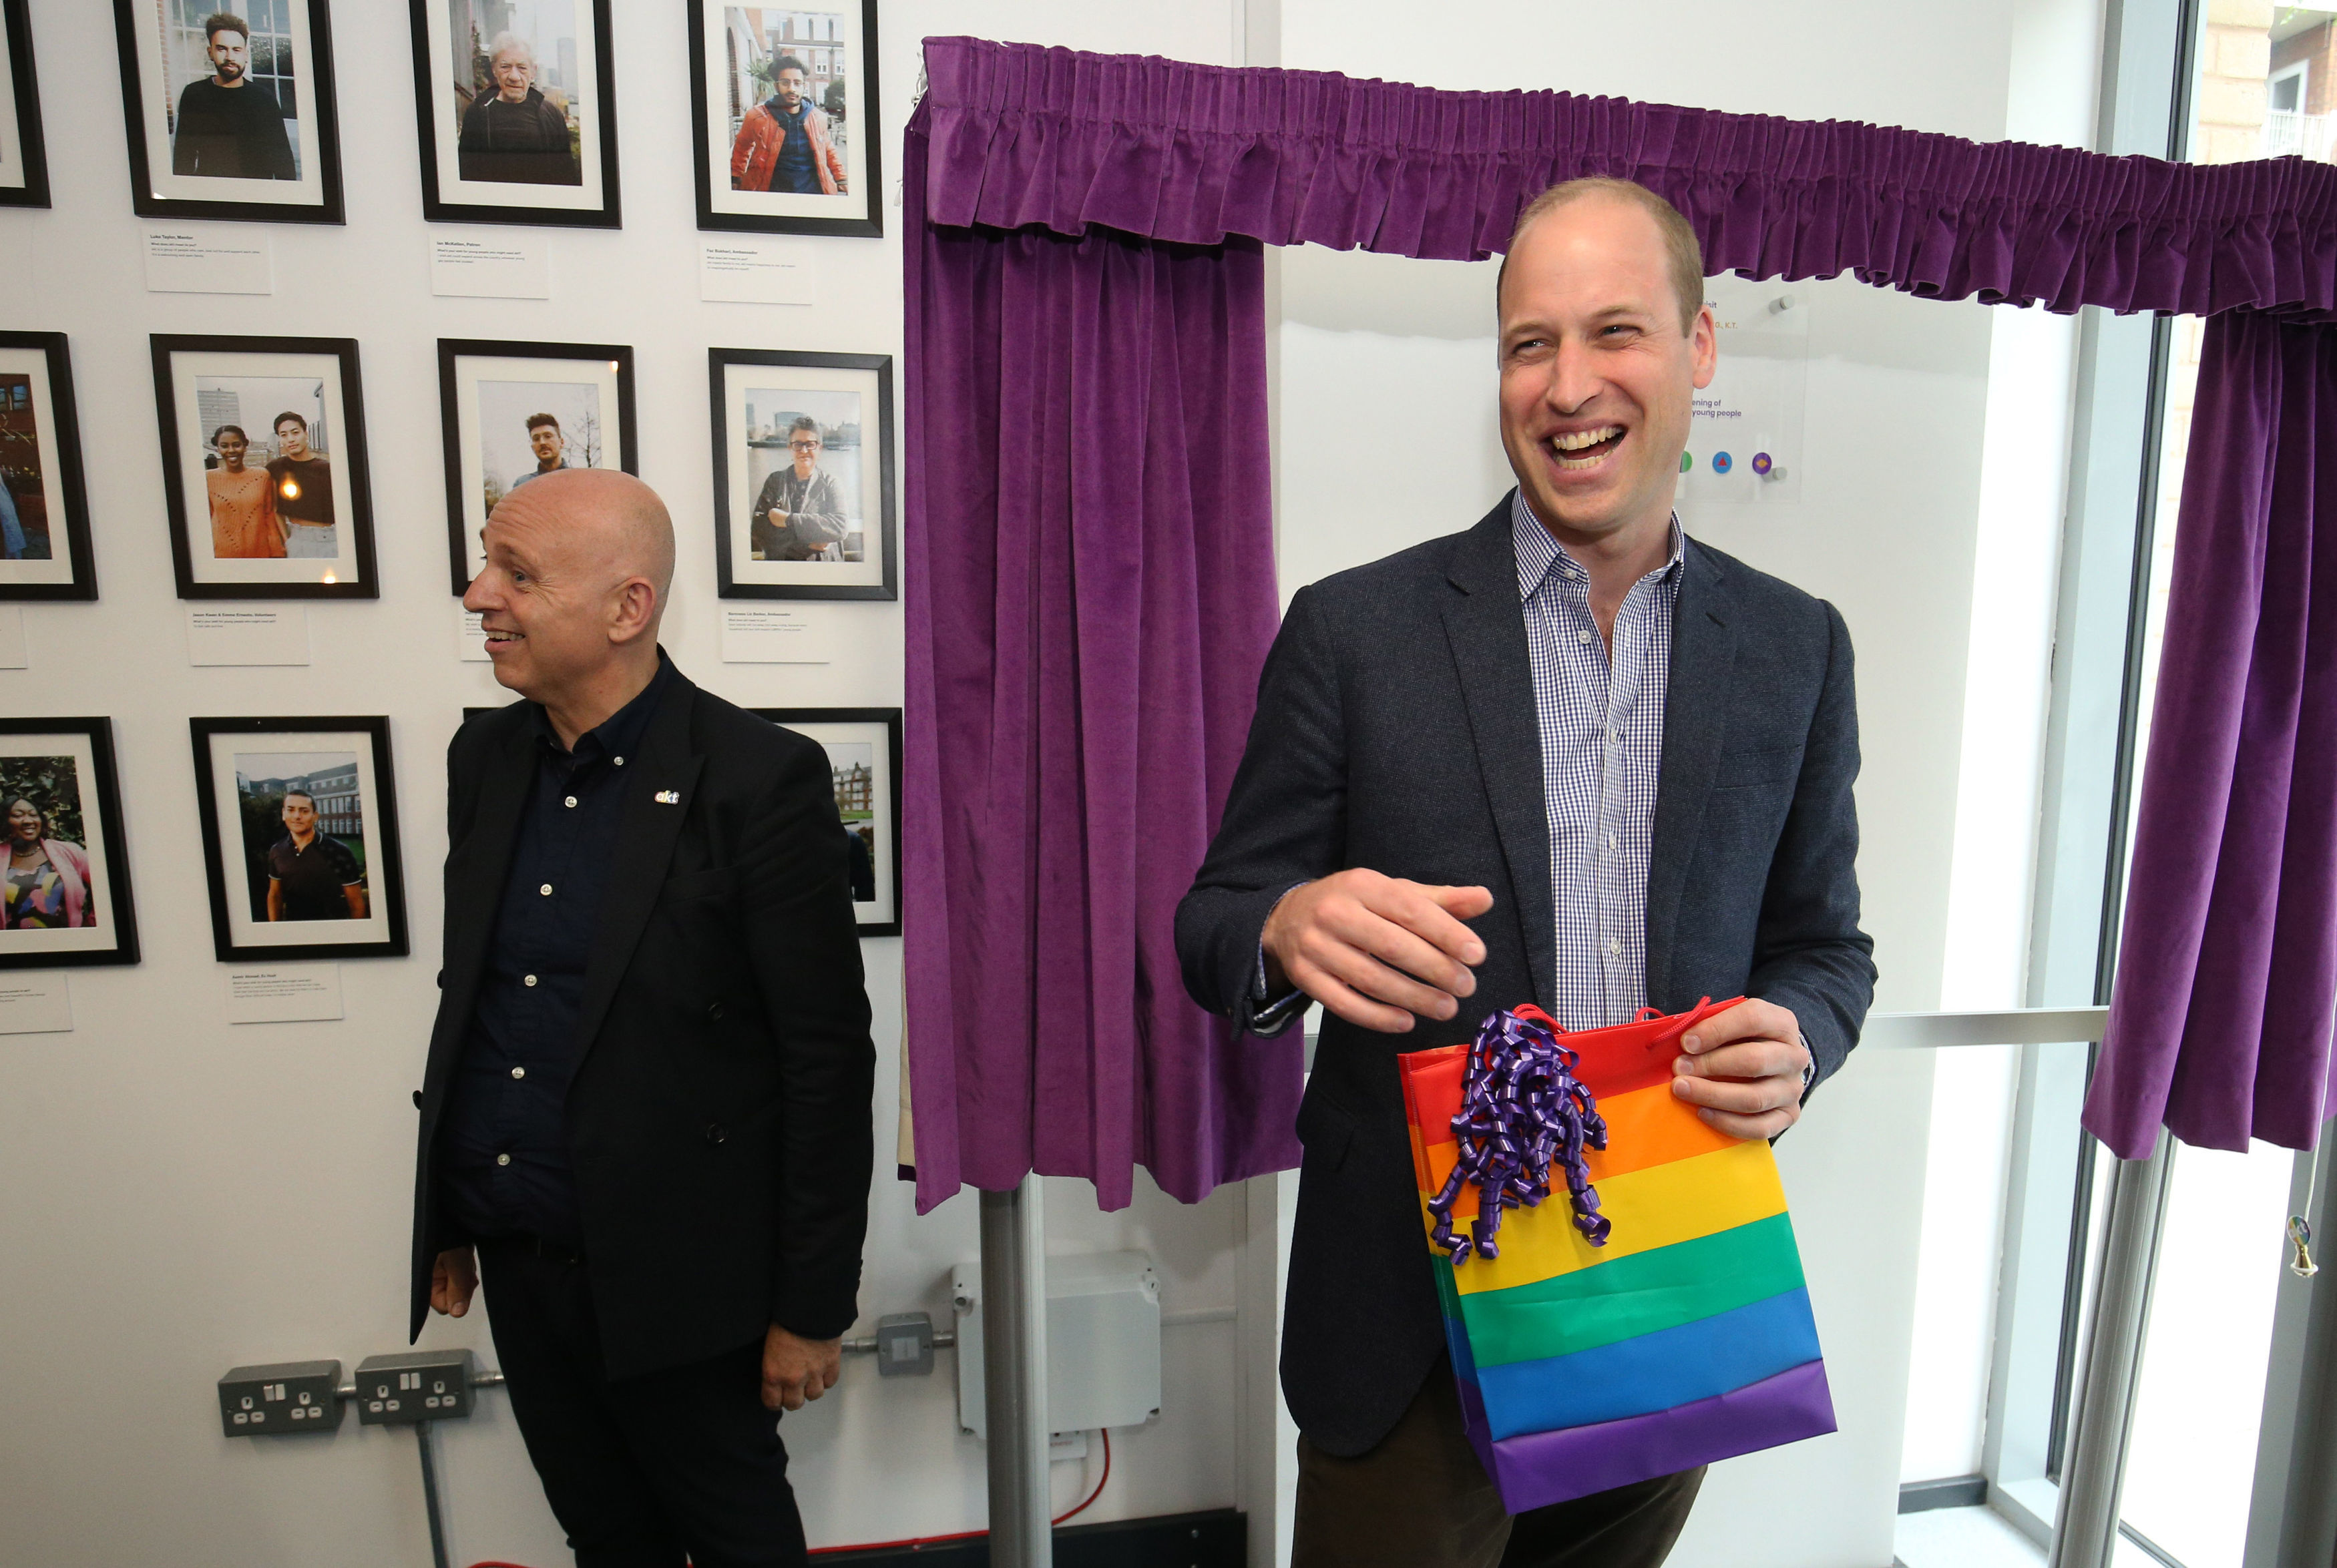 Britain's Prince William, Duke of Cambridge, reacts to receiving a gift bag from trust chief executive officer Tim Sigsworth during a visit to the Albert Kennedy Trust in London to learn about the issue of LGBTQ youth homelessness in London on June 26, 2019. (Photo credit JONATHAN BRADY/AFP/Getty Images)